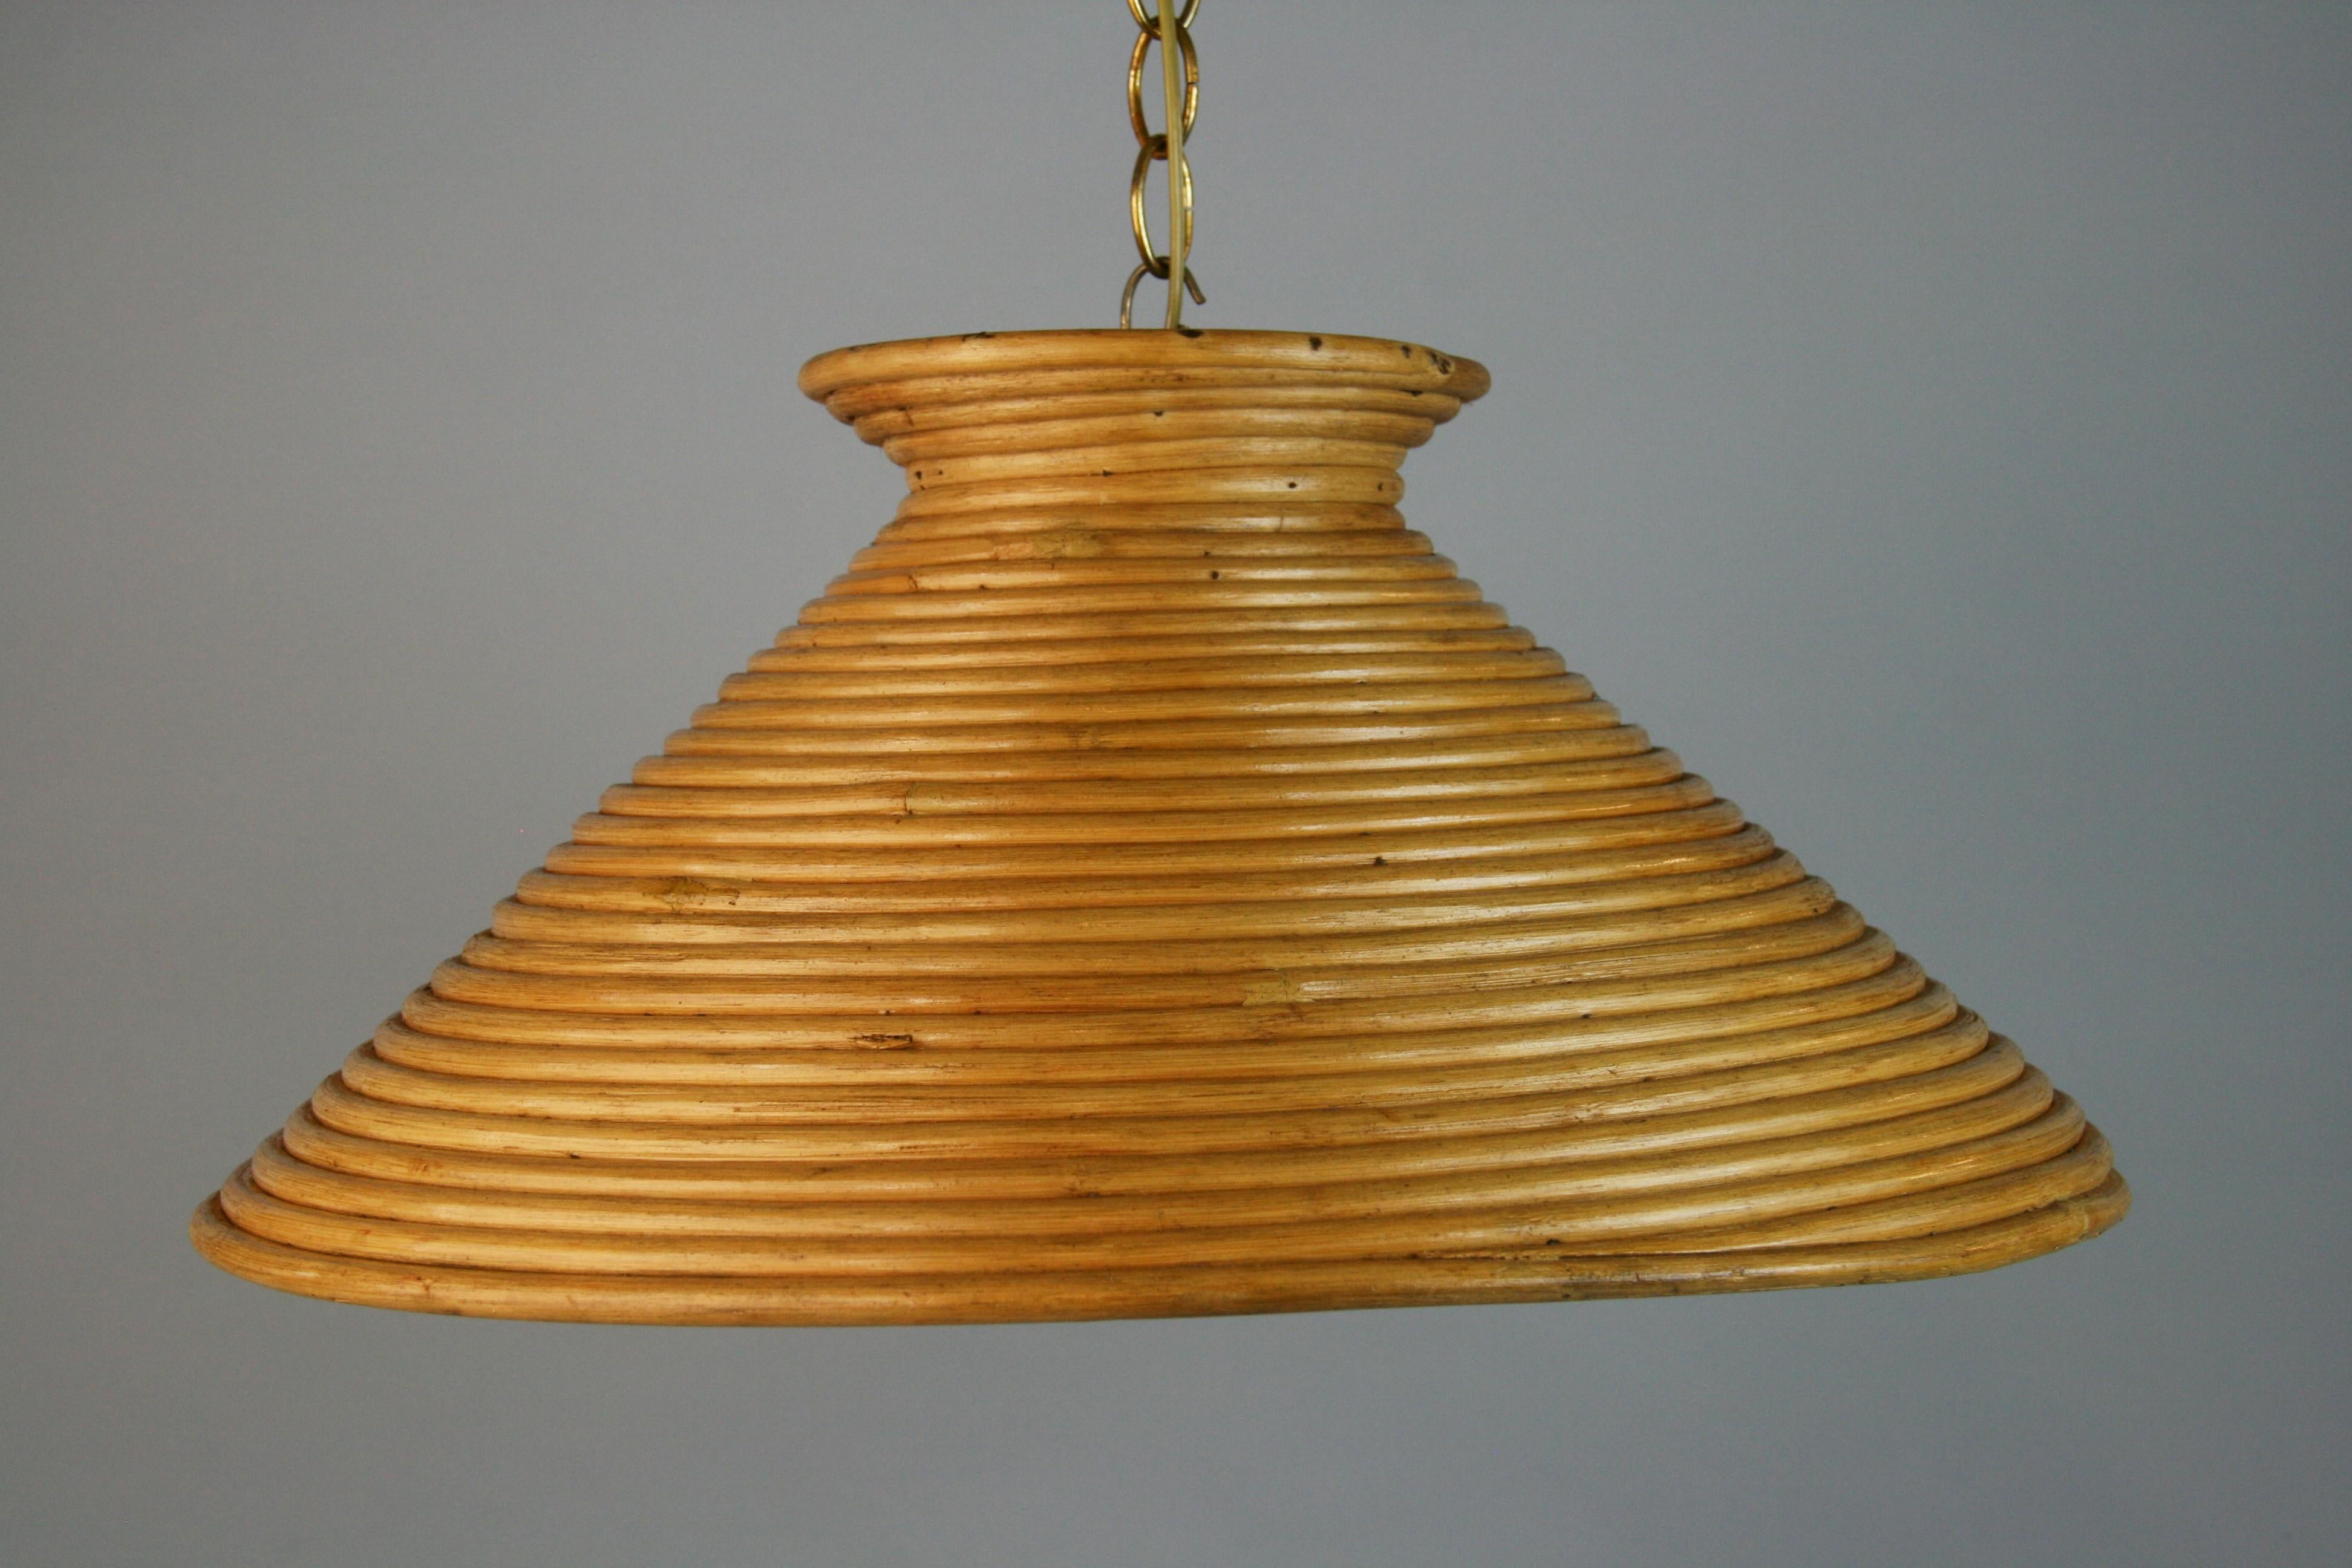 1418 French rapped reed cone pendant
Takes one Edison based bulb
Supplied with 3 feet brass chain and canopy